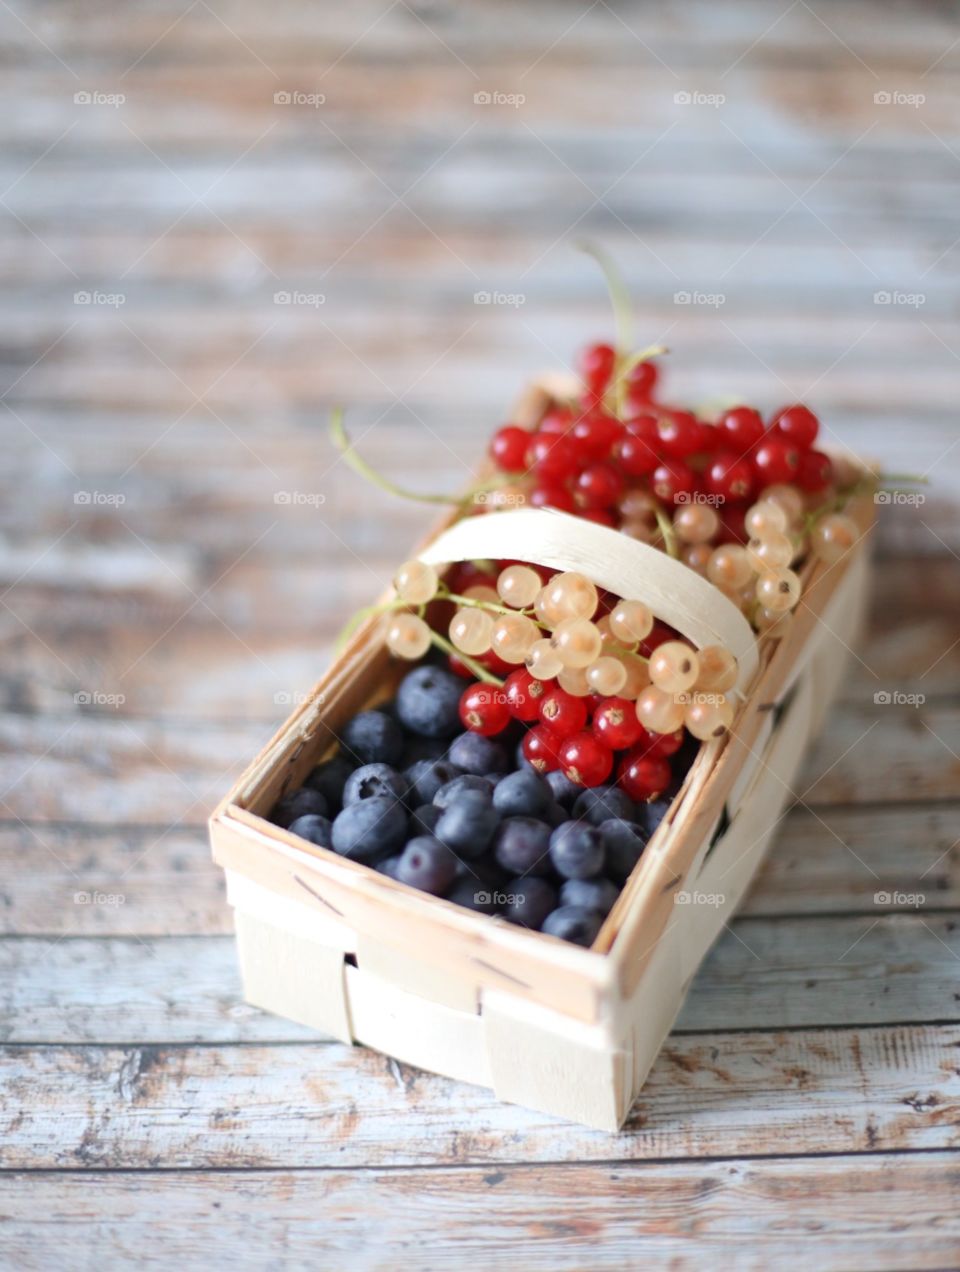 Mixed Berries. Sommer